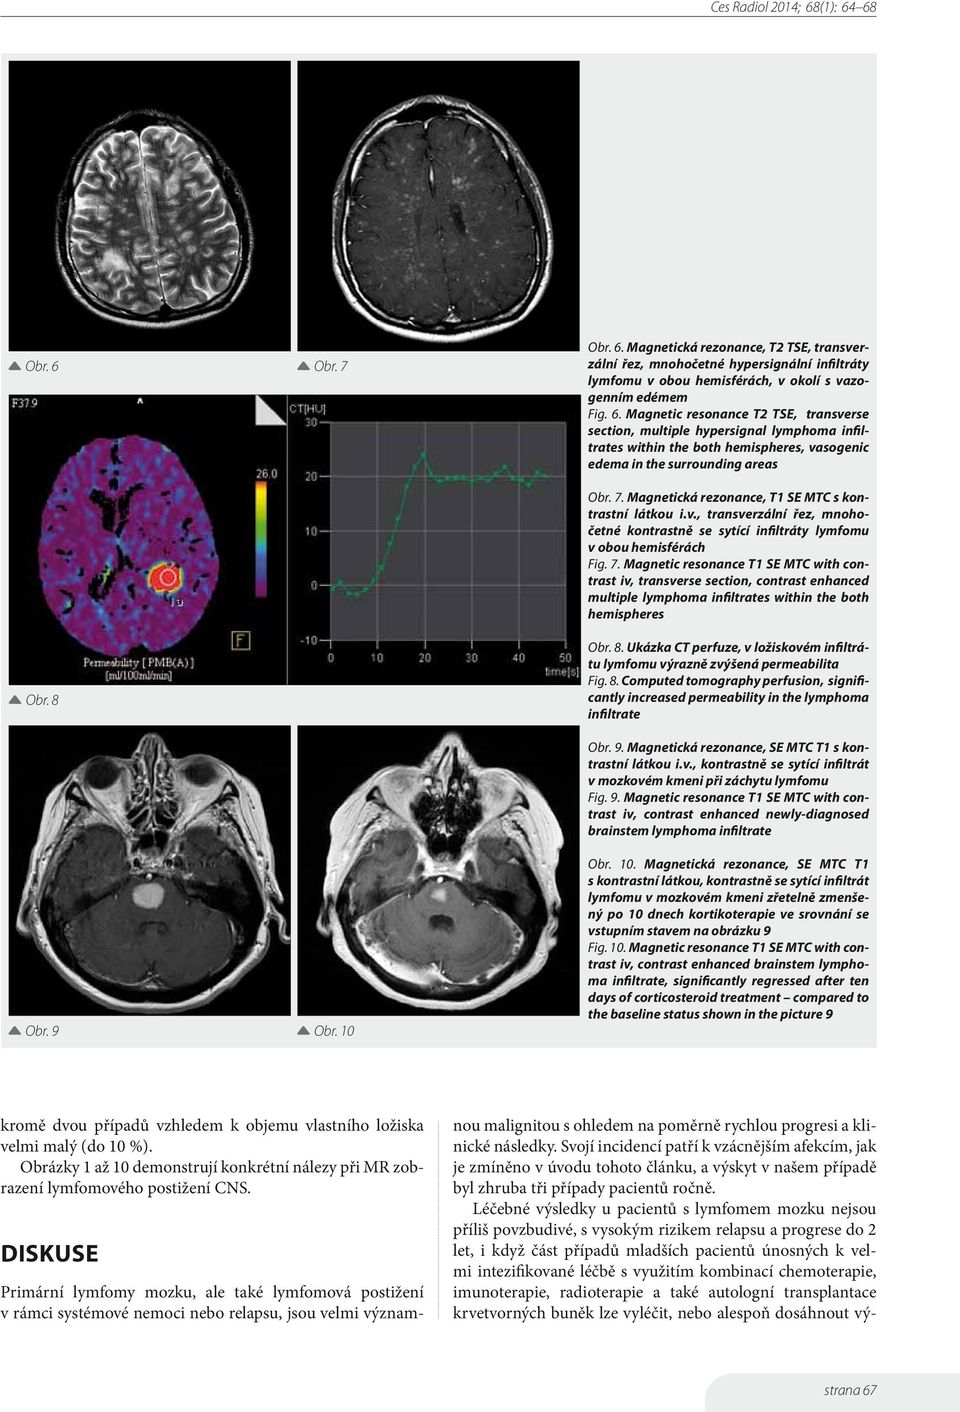 Magnetic resonance T1 SE MTC with contrast iv, transverse section, contrast enhanced multiple lymphoma infiltrates within the both hemispheres Obr. 8.